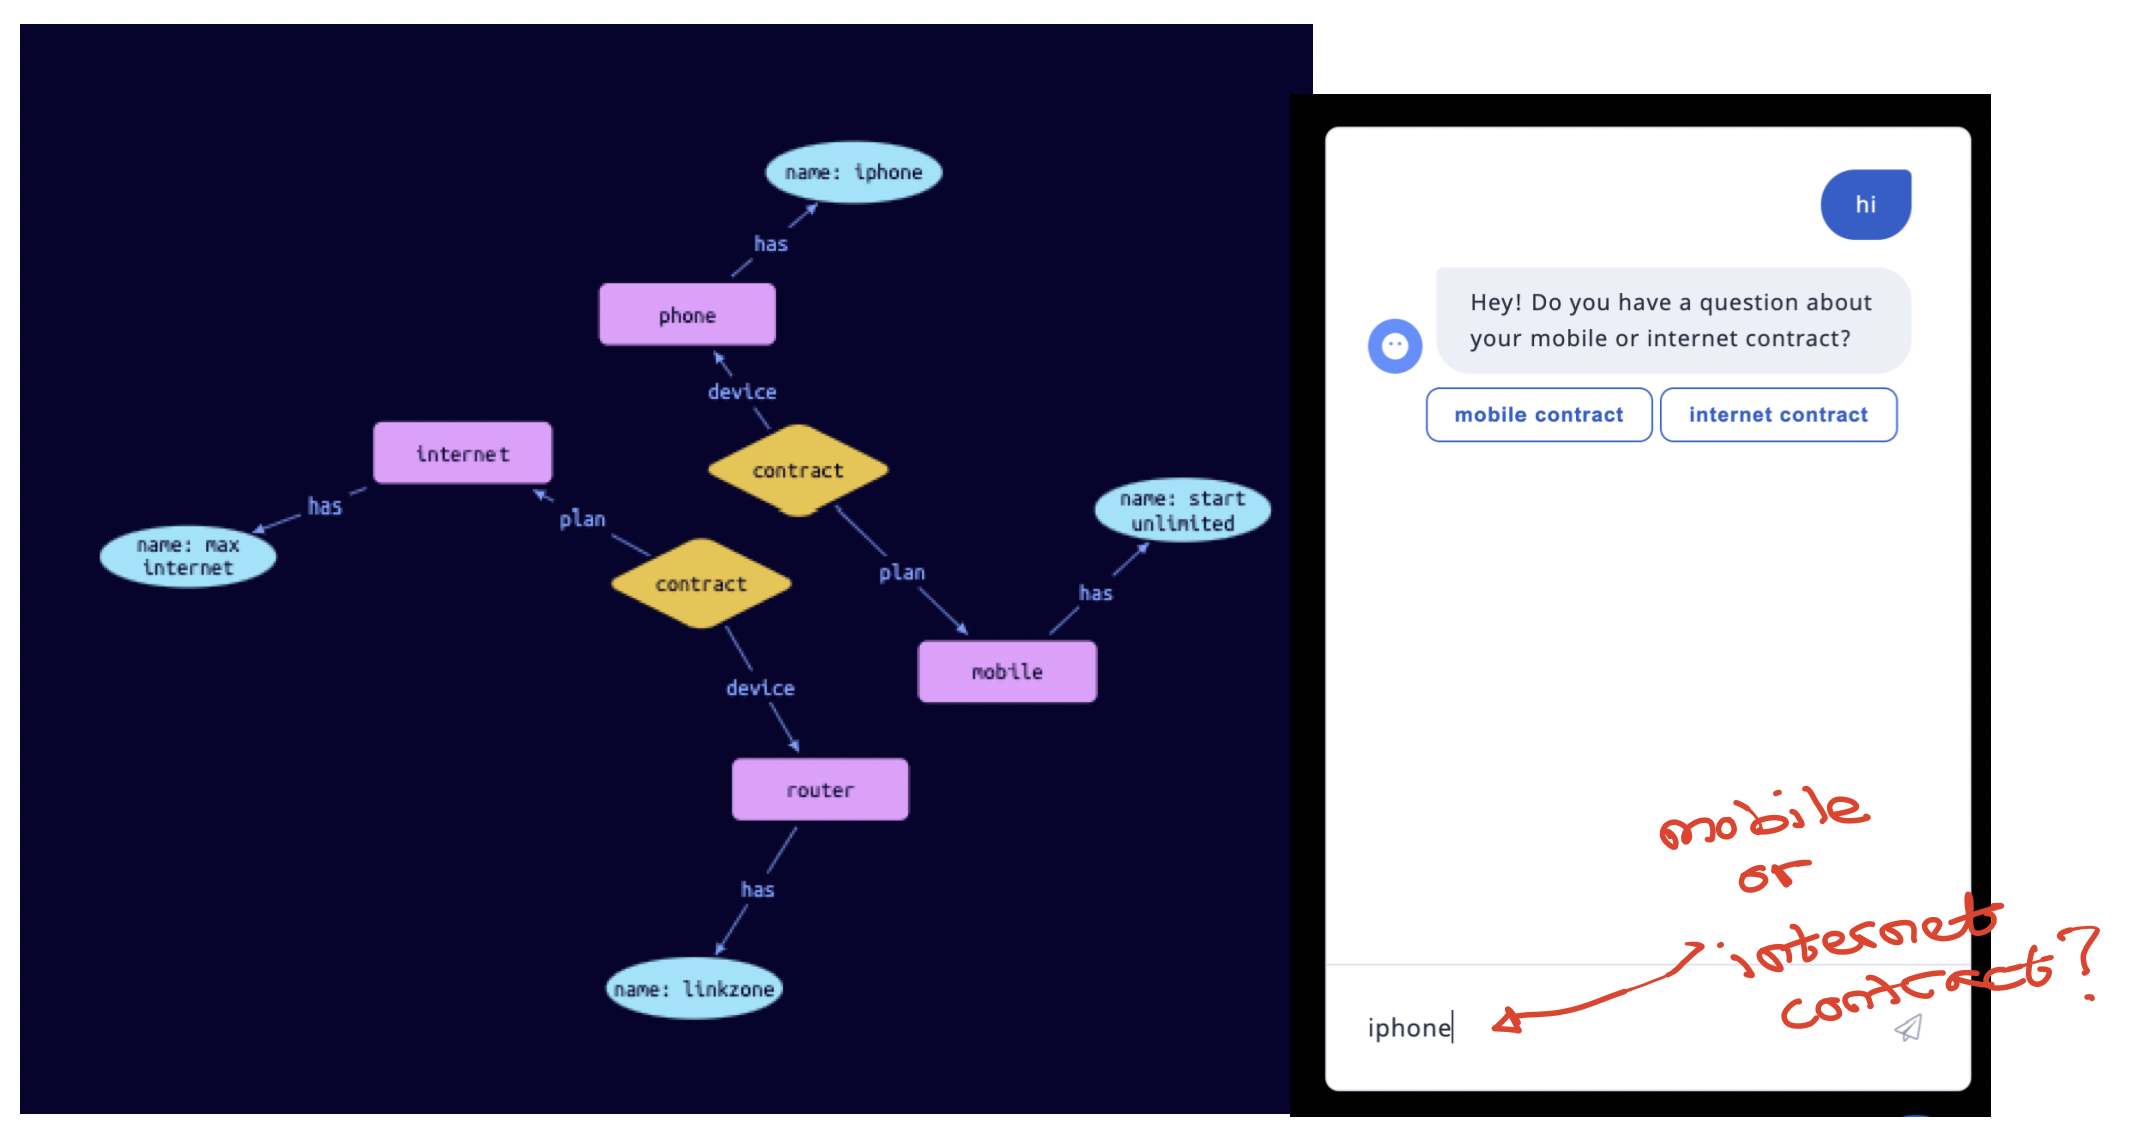 How To Use Knowledge Graphs To Build Chatbots That Can Parse Ambiguous User Utterances